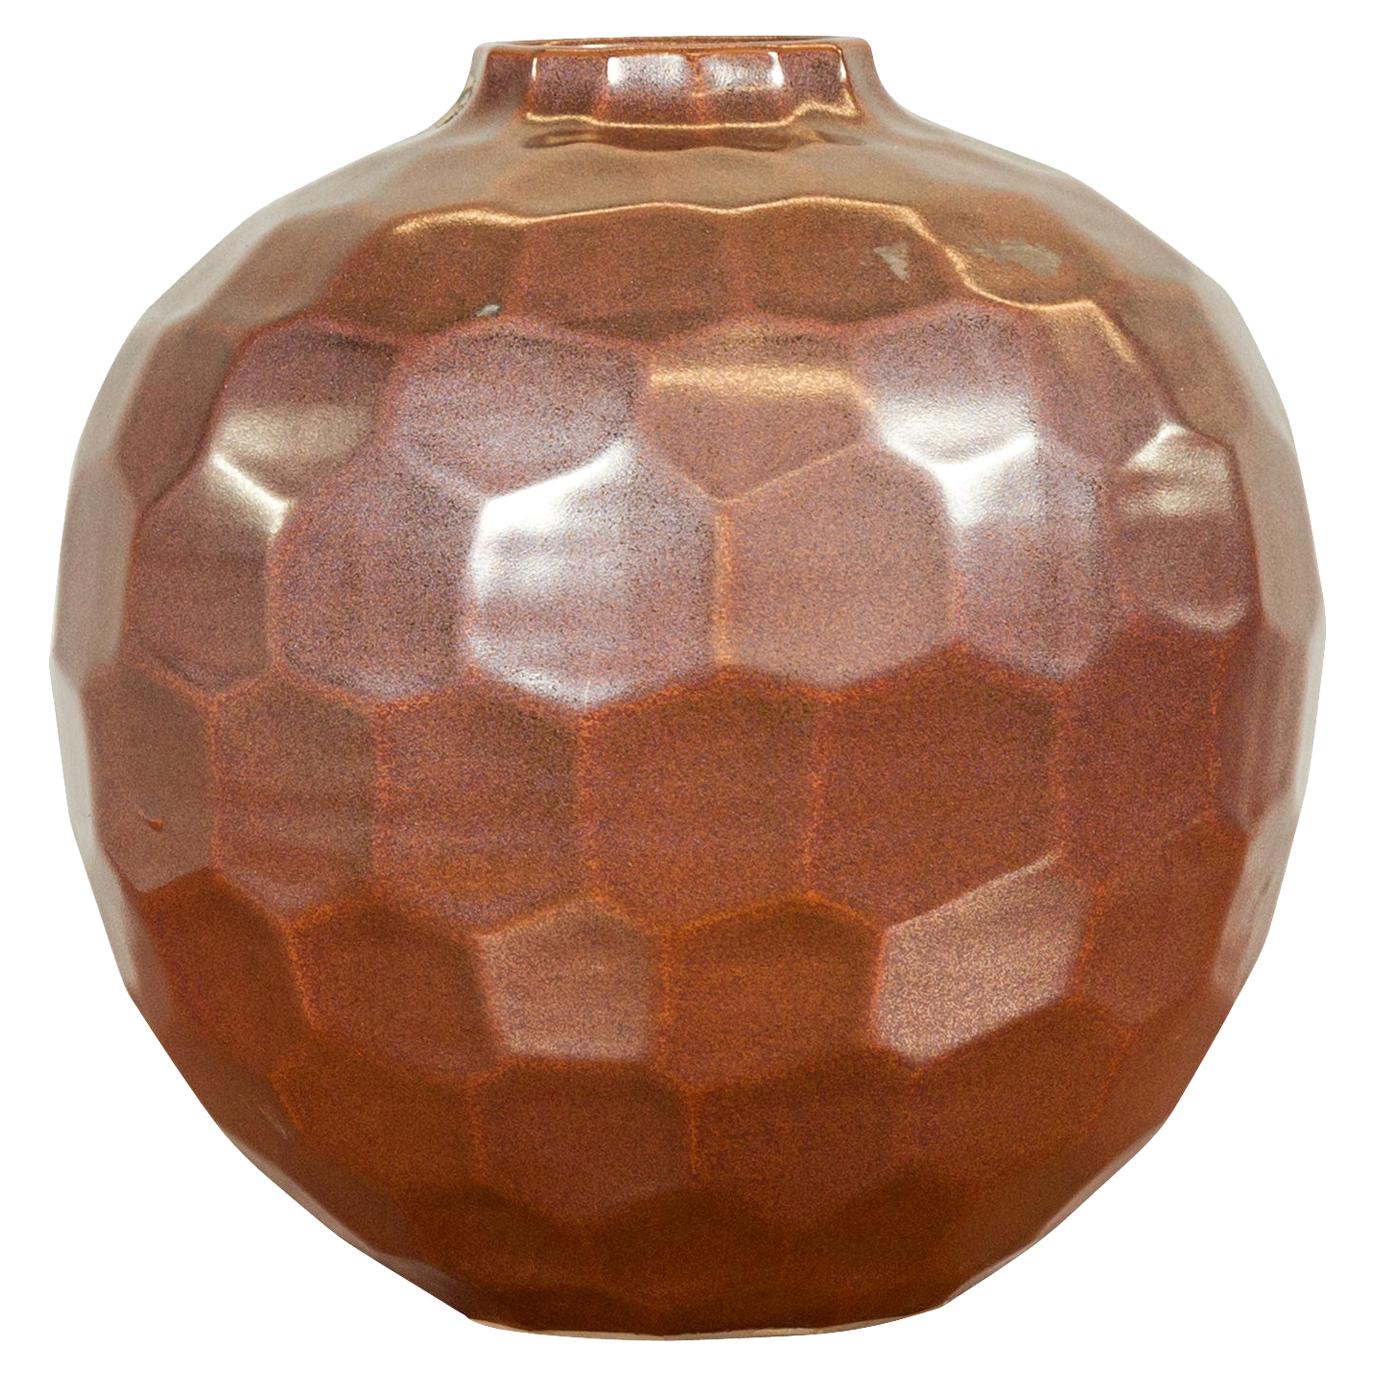 Handmade Chiang Mai Northern Thai Ceramic Vase with Faceted Tortoise Pattern